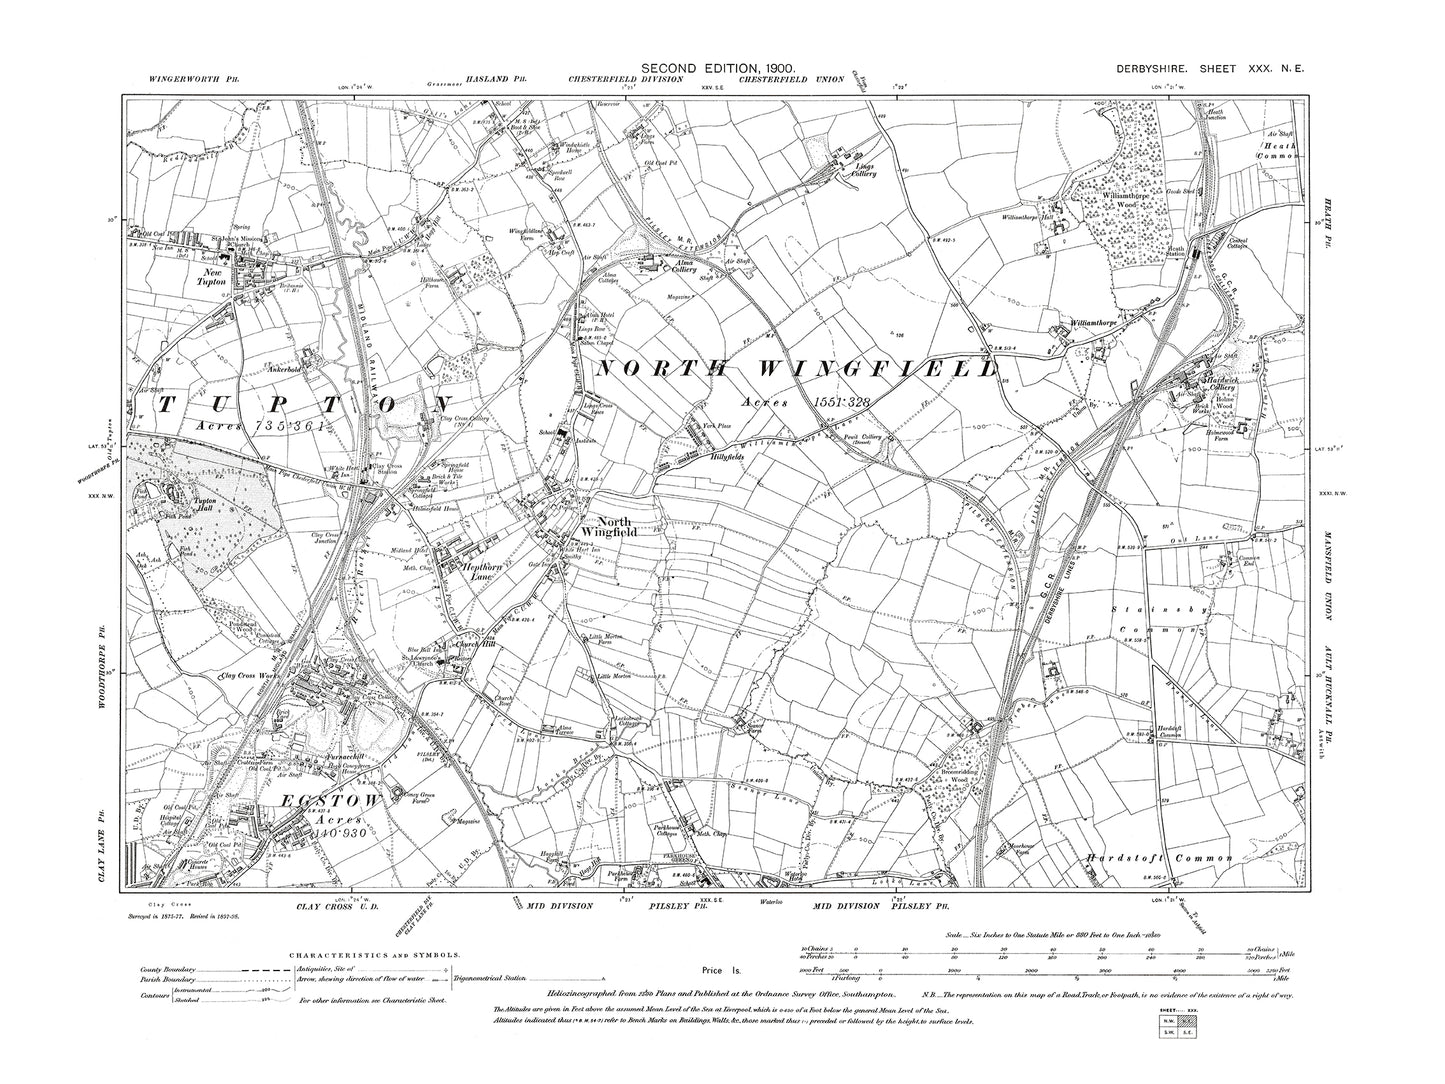 Old OS map dated 1900, showing Clay Cross (north), North Wingfield, New Tupton in Derbyshire 30NE